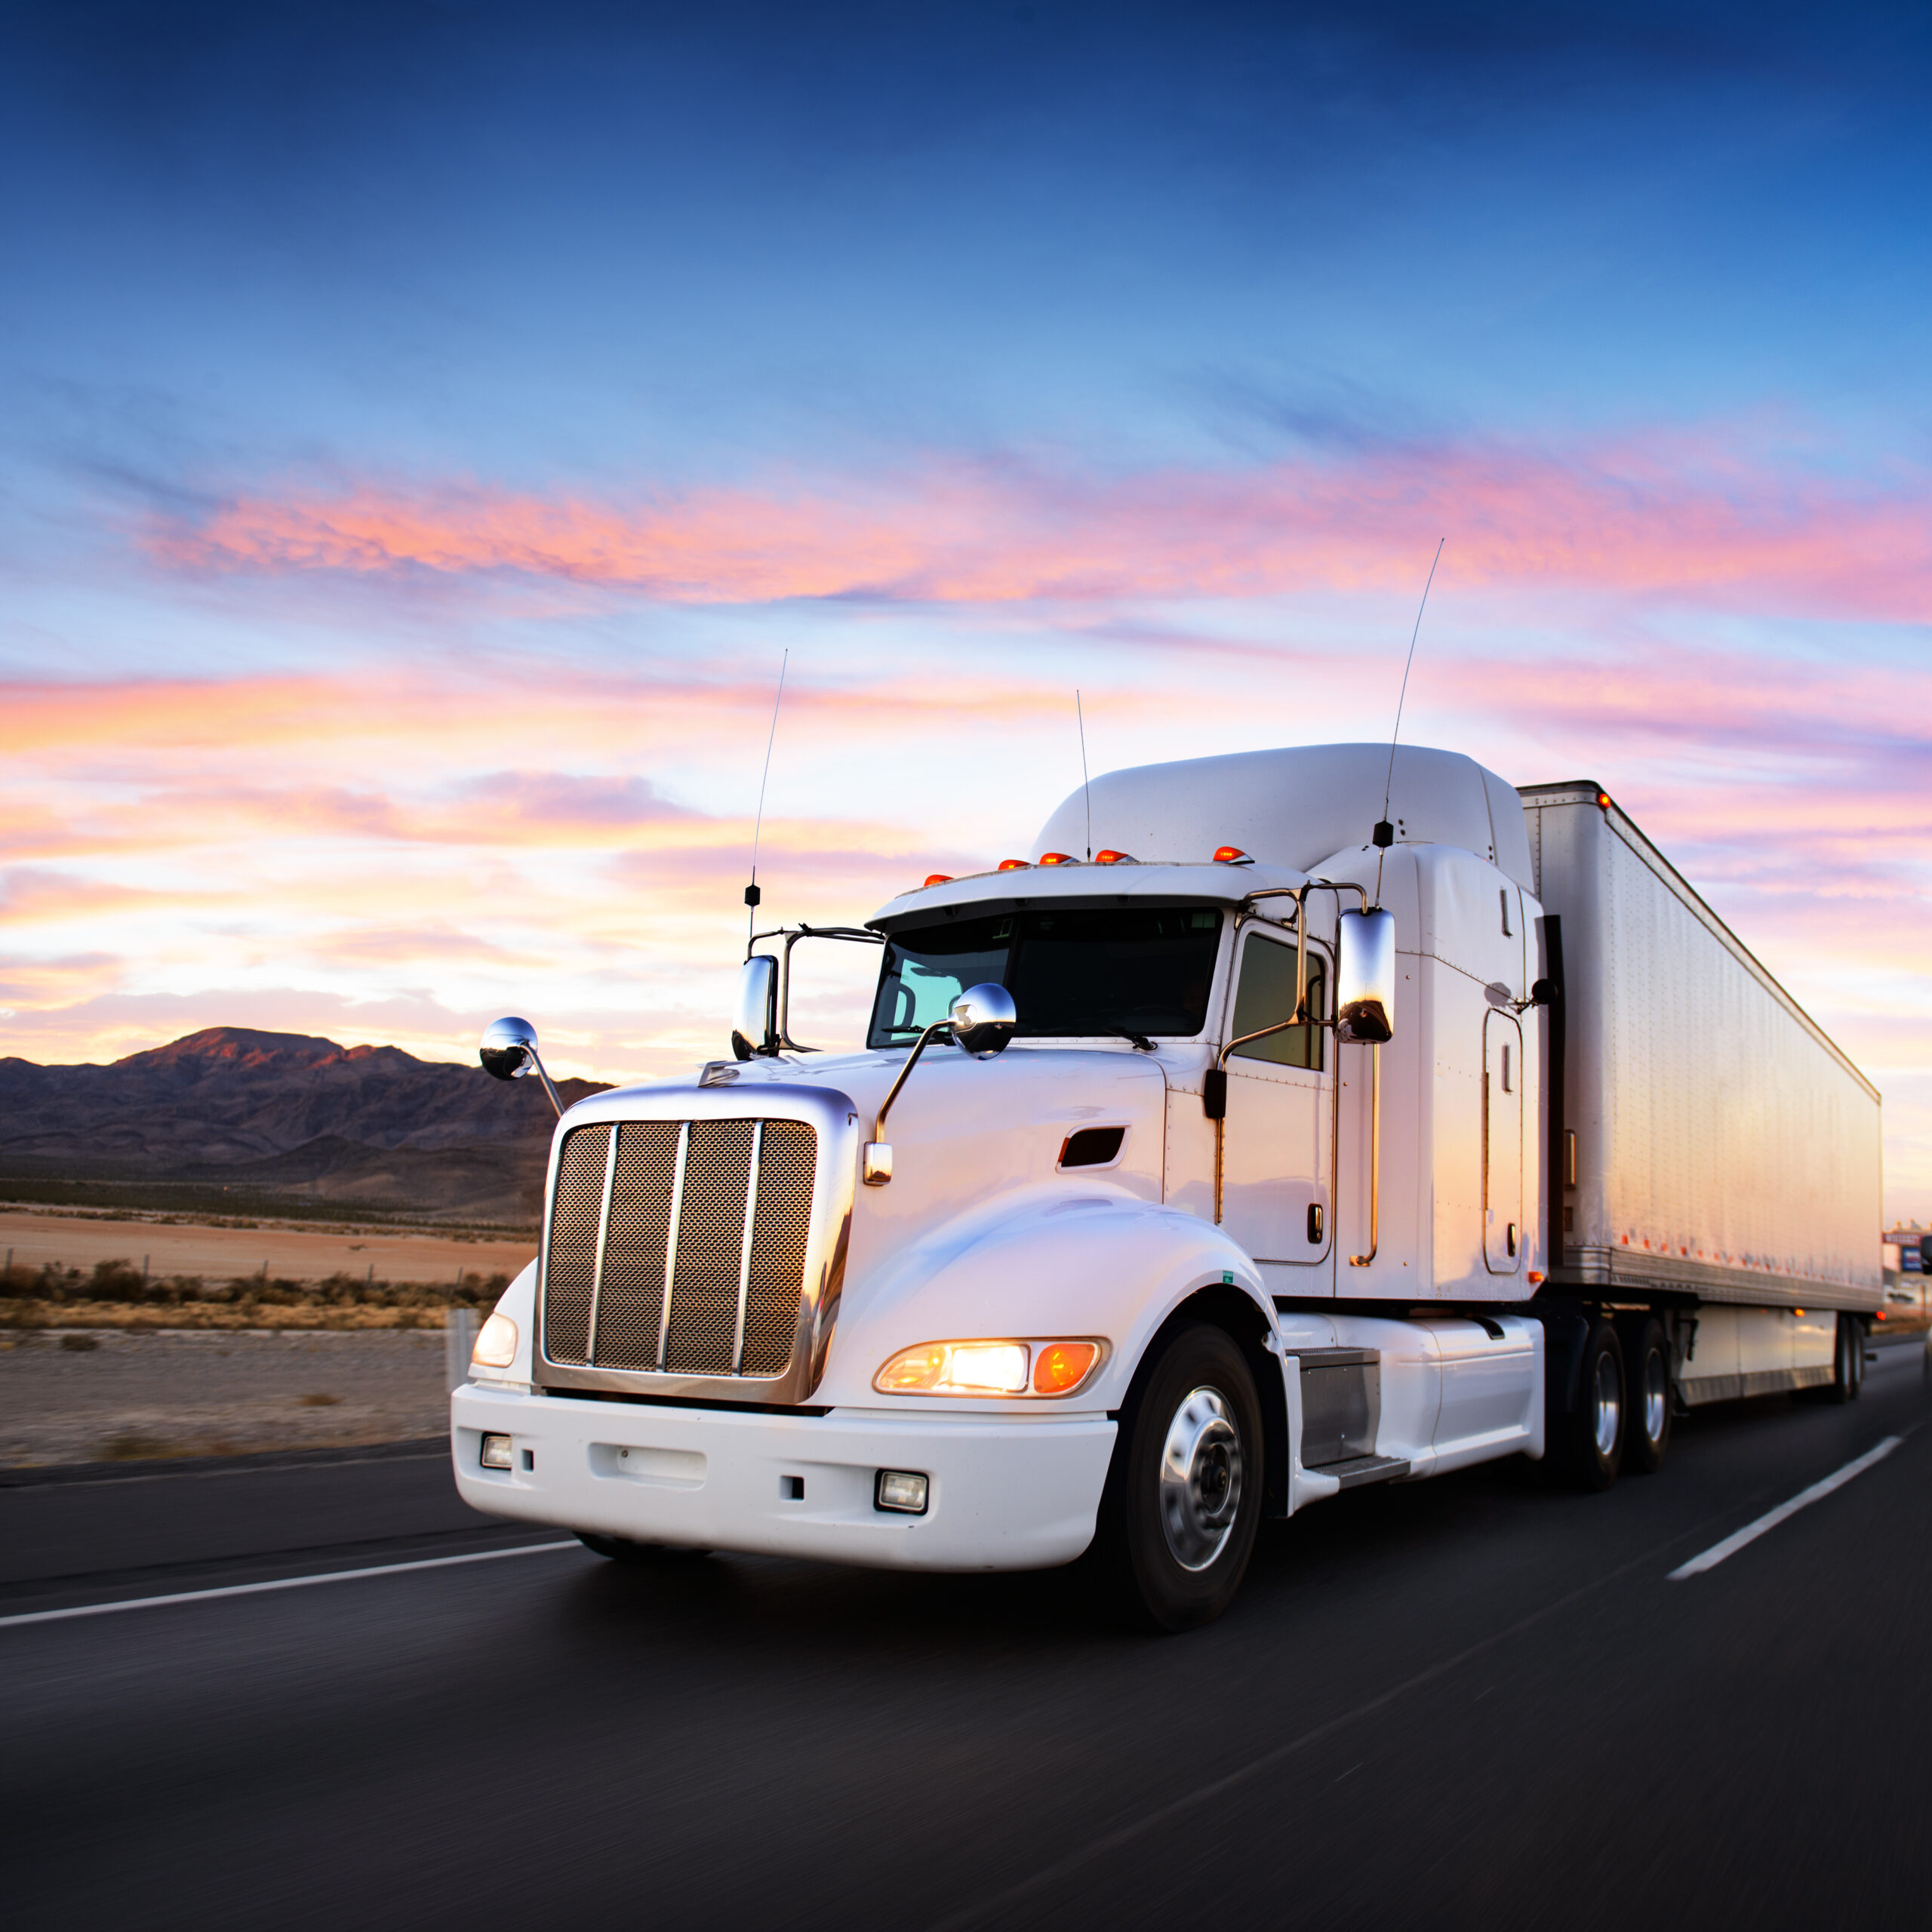 Commentary: Flexible Finance Programs a Larger Focus for Fleets